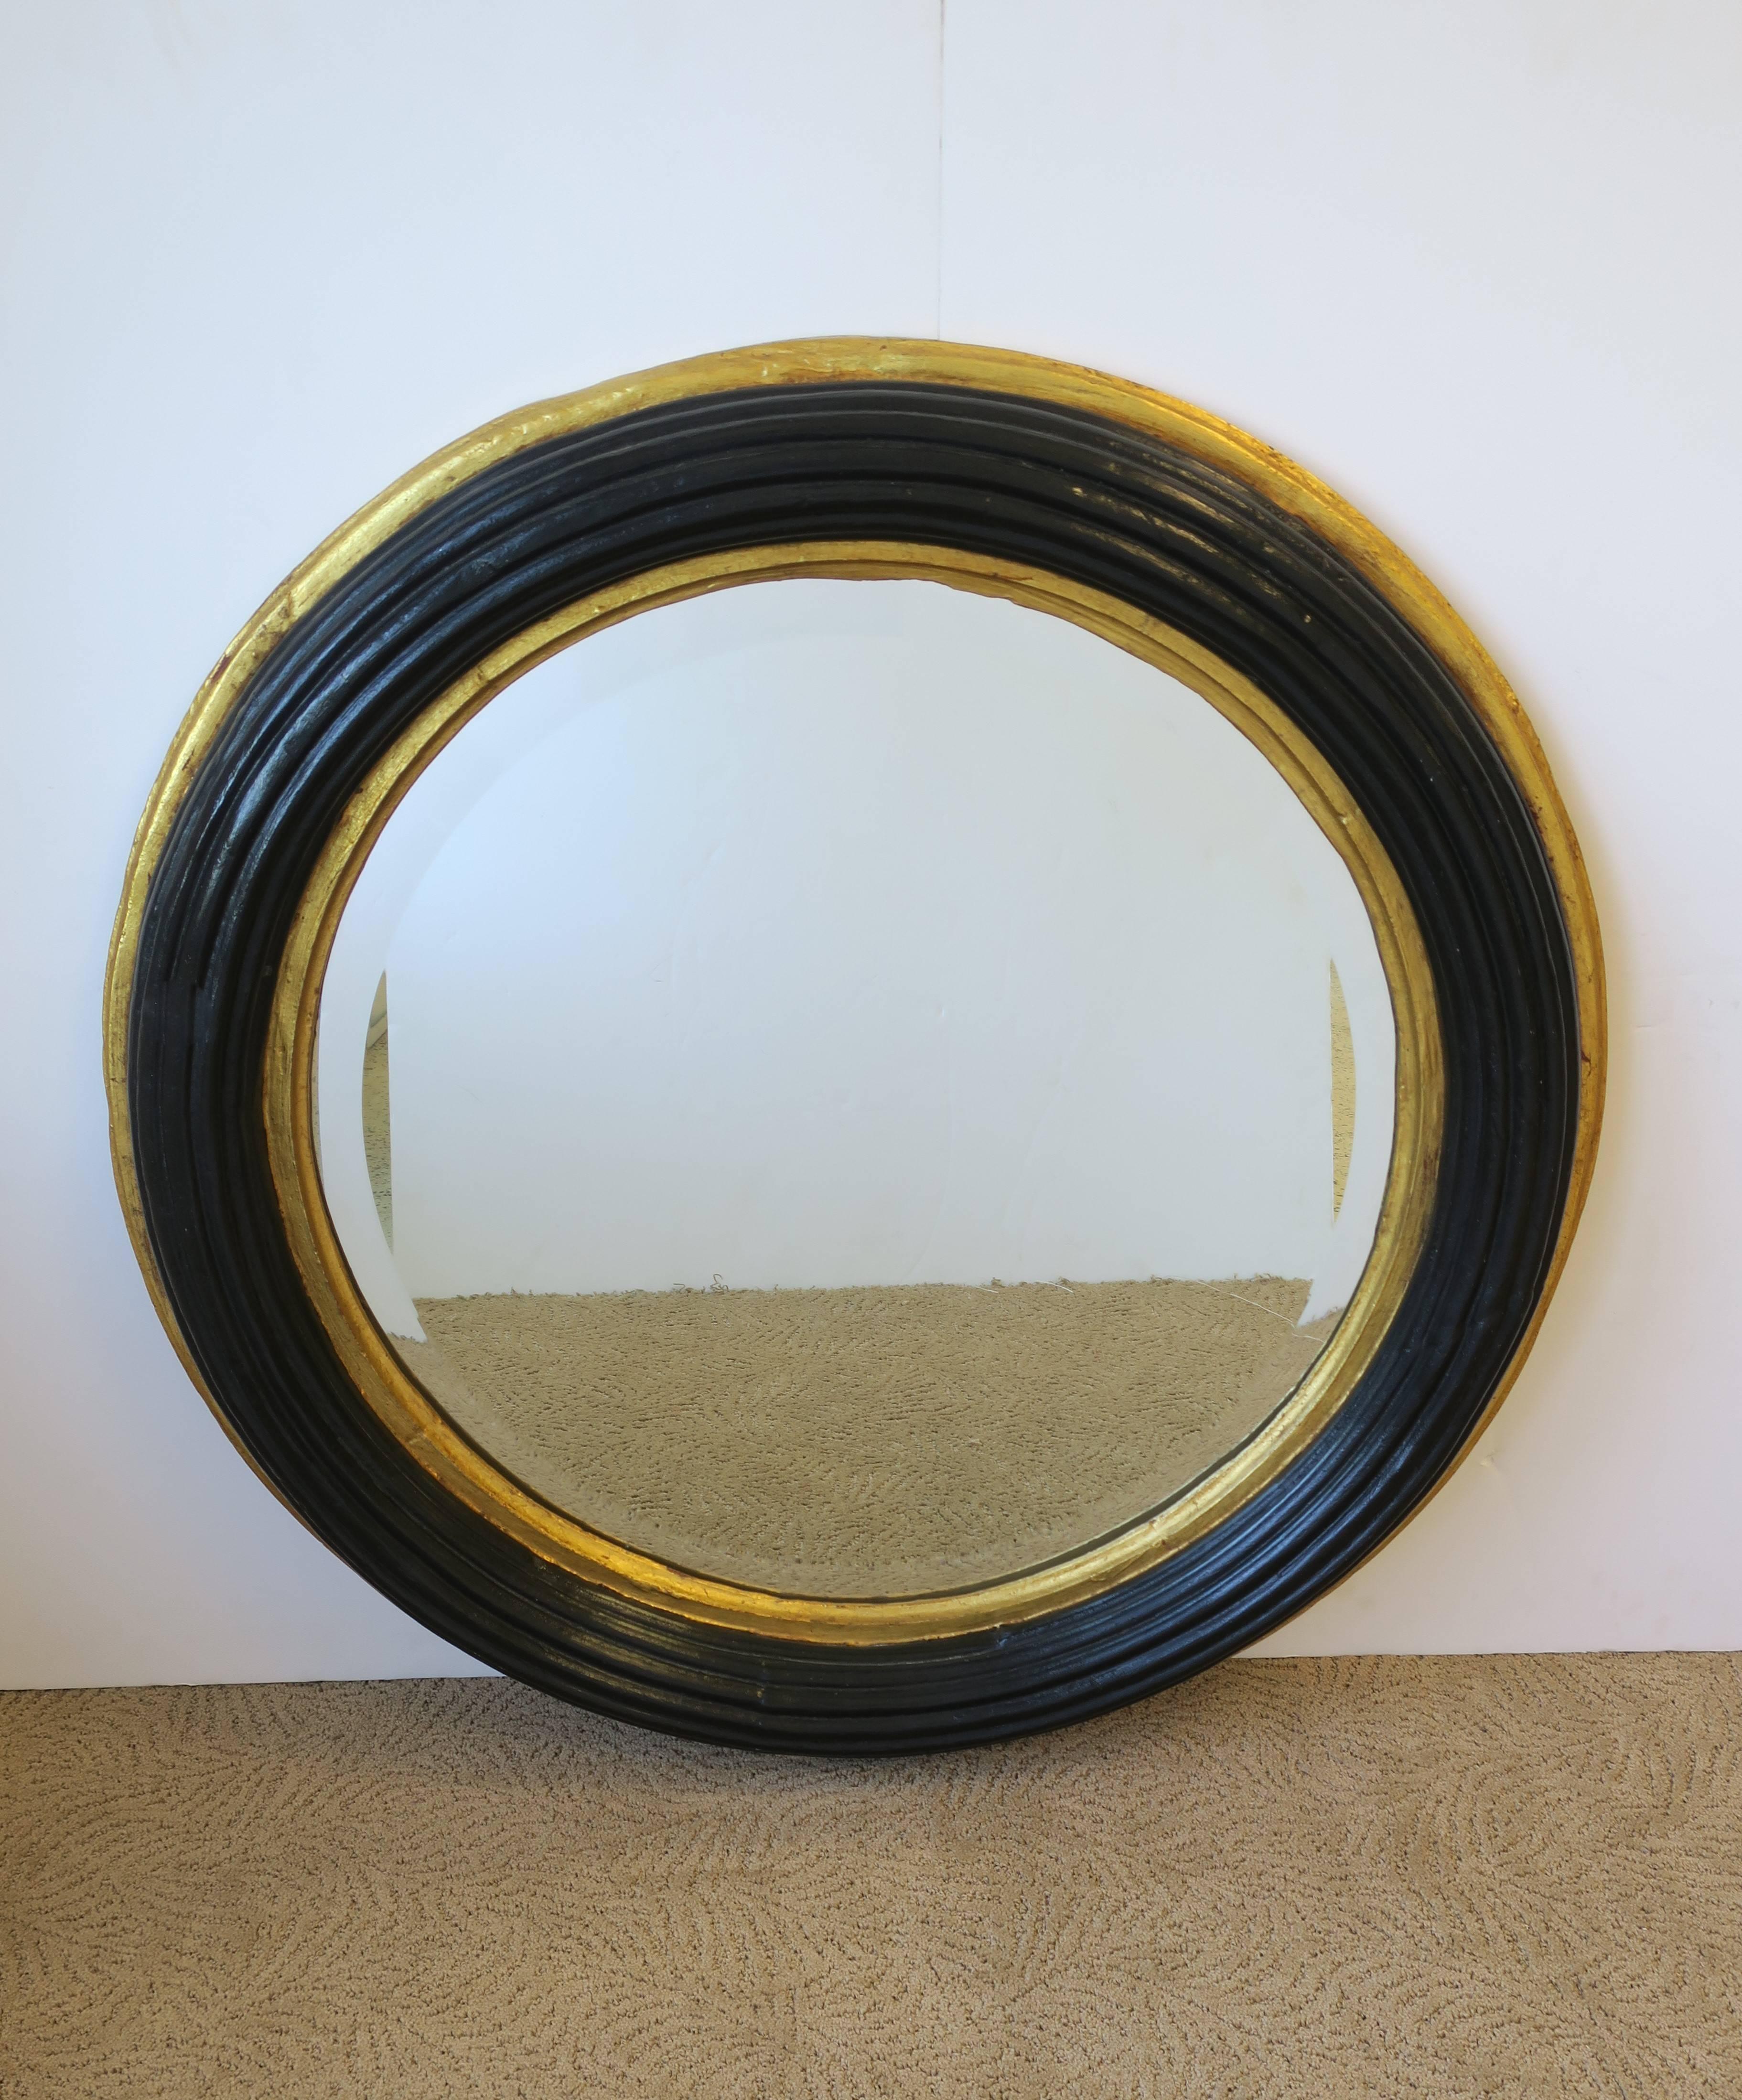 A beautiful and substantial Mid-Century round black and gold beveled wall mirror. Black lacquer paint and gold gilt paint on ribbed wood frame, surrounding beveled mirror. Bevel is approximatly 1 in. wide. 

Mirror measures: 34 in. in diameter x